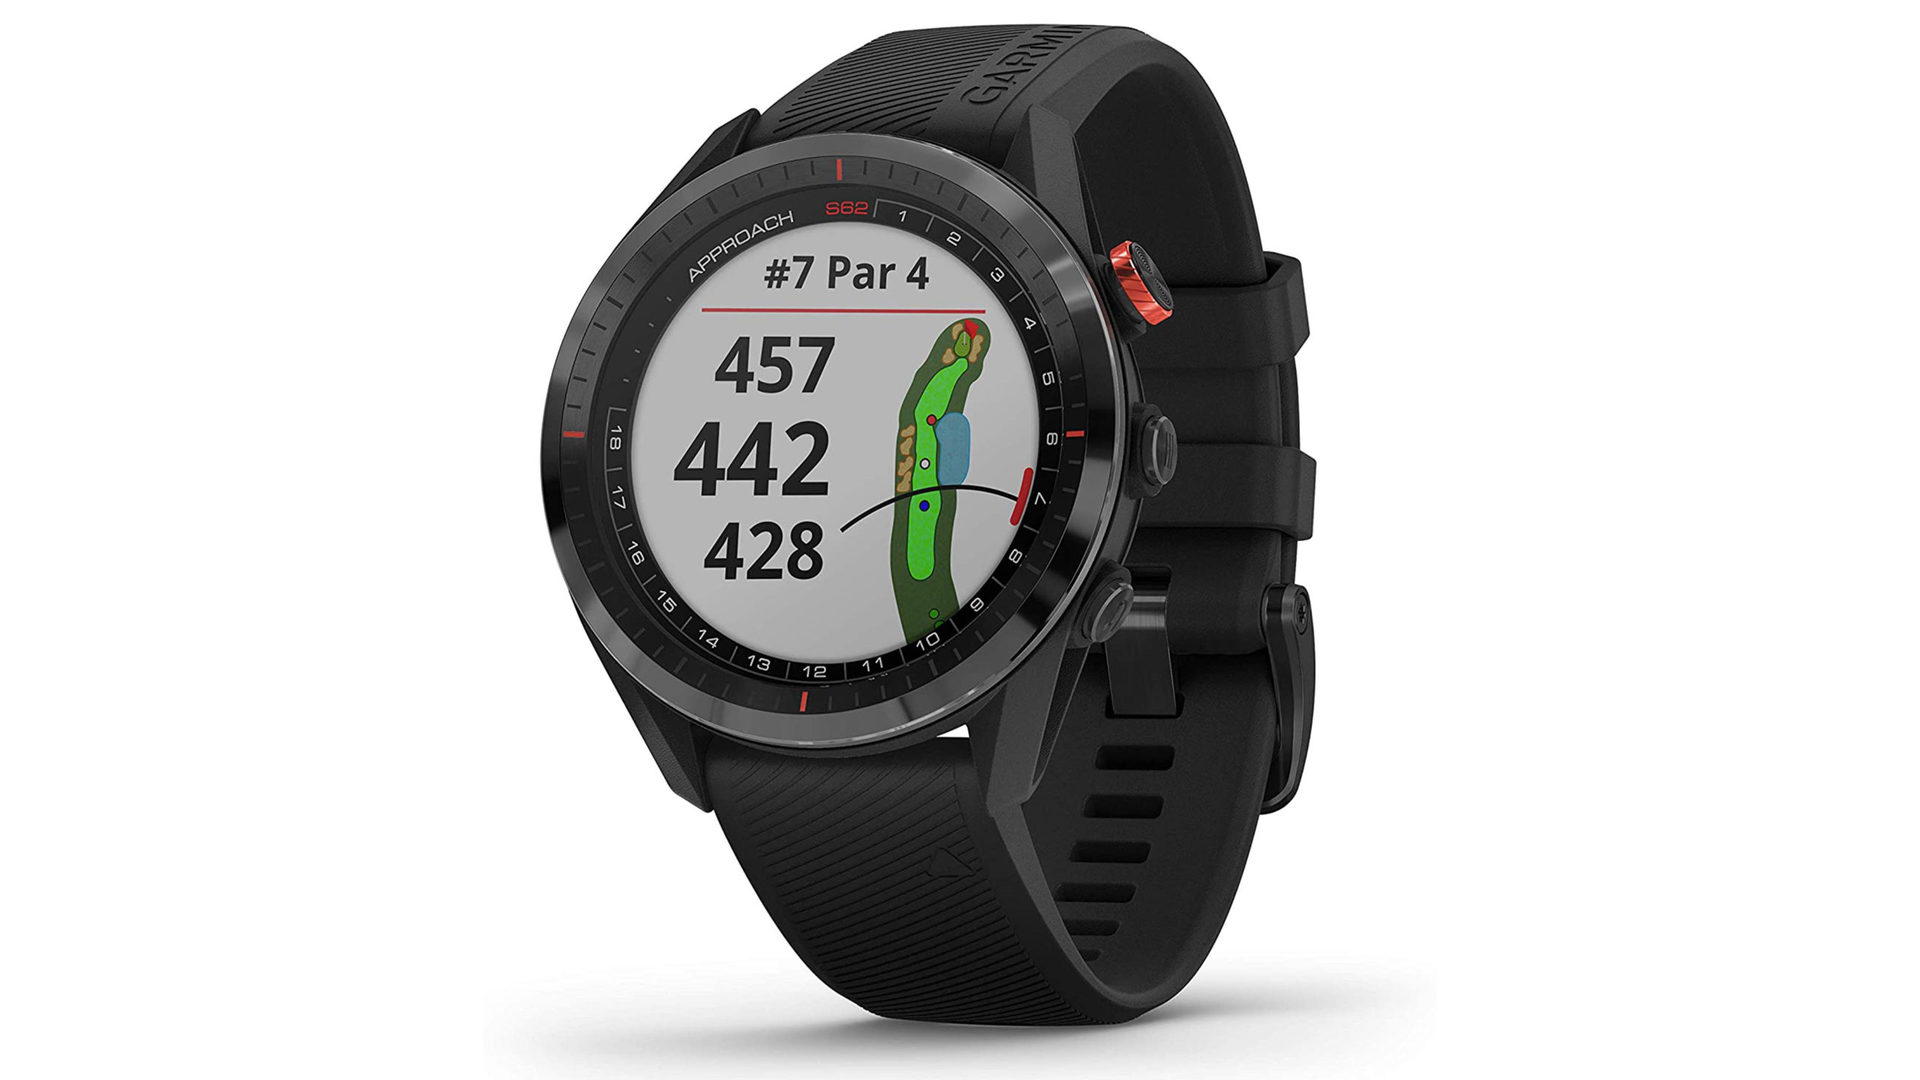 The Garmin Approach S62, has now been outdone by the S70, but is still a great buy. 